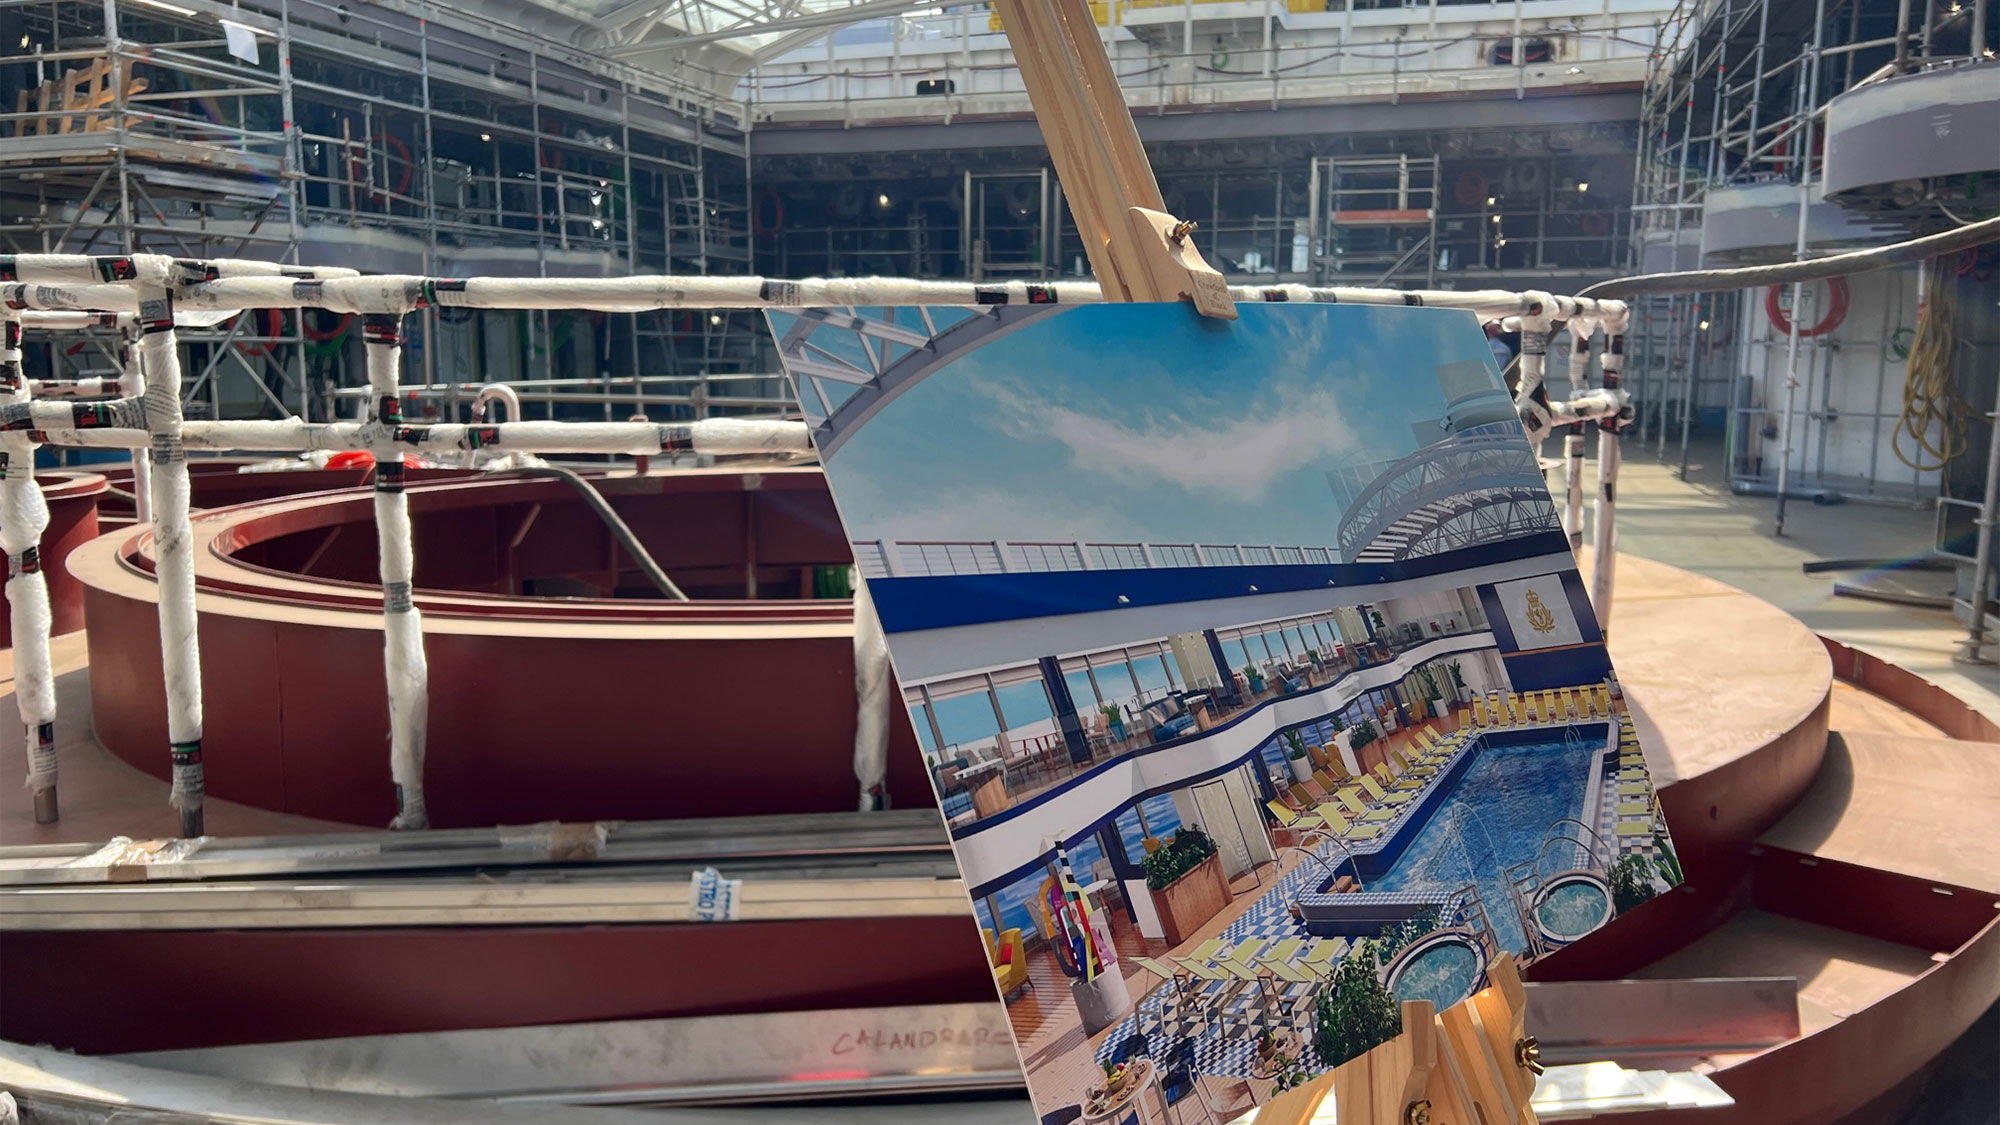 A rendering on an easel shows what the Queen Anne's midship pool area will look like. This space will include new amenities for Cunard guests, including a gelato bar and an eatery focused on healthy food.